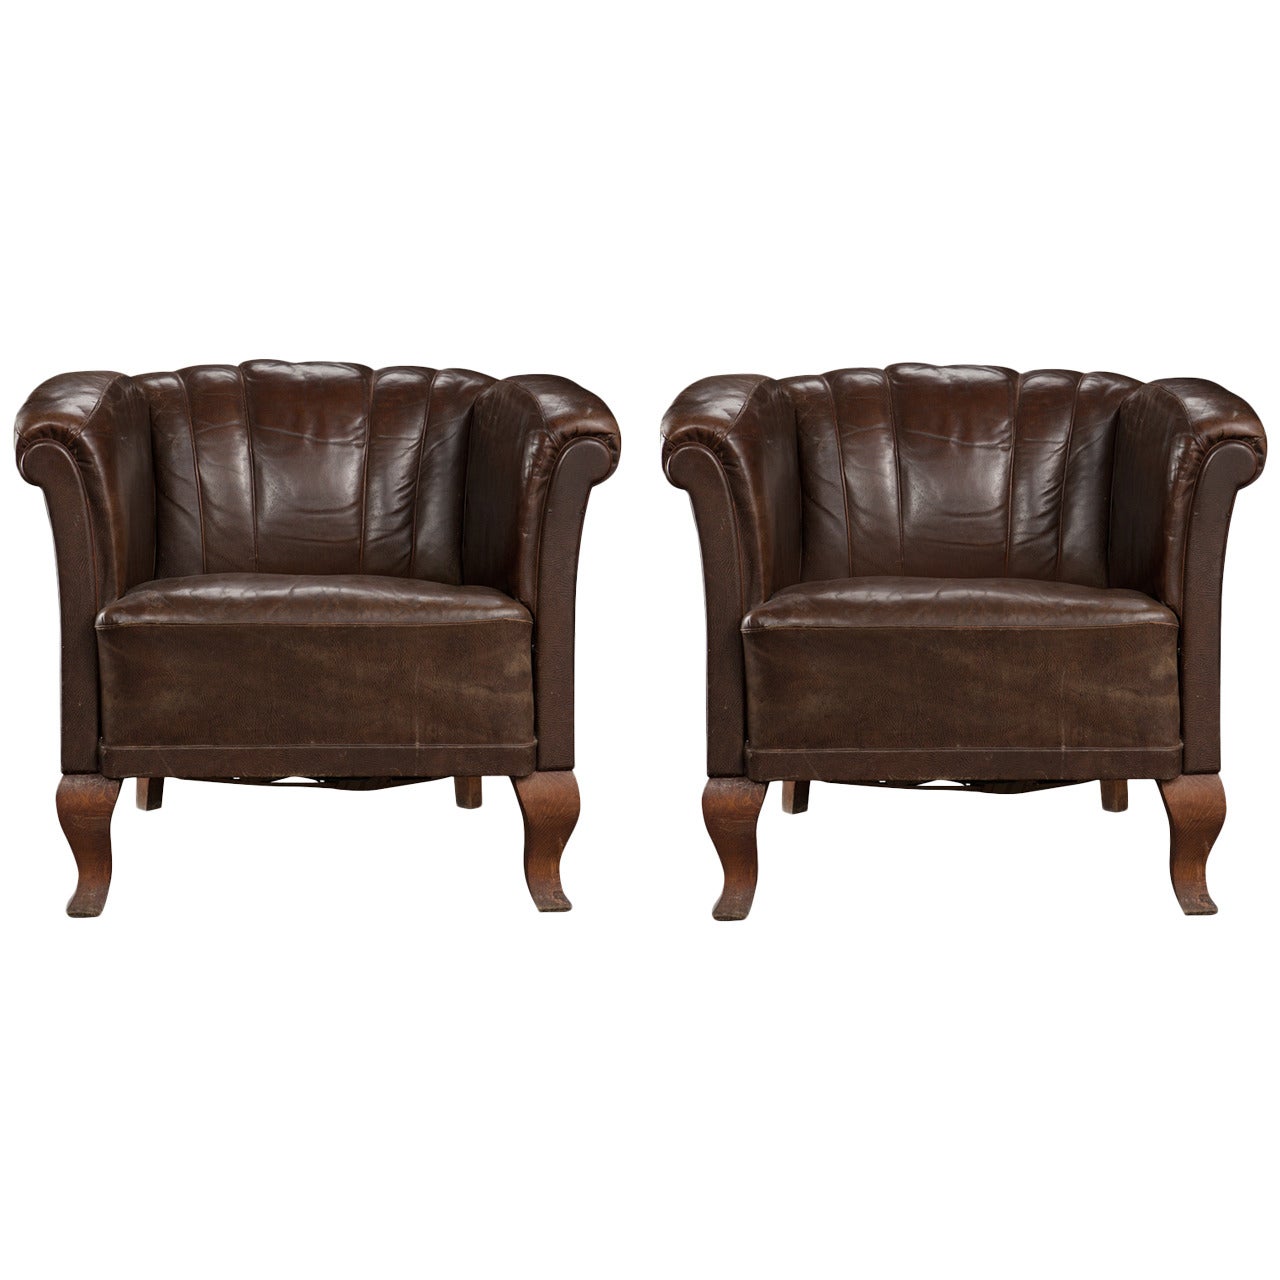 Pair of Leather Deco Club Chairs